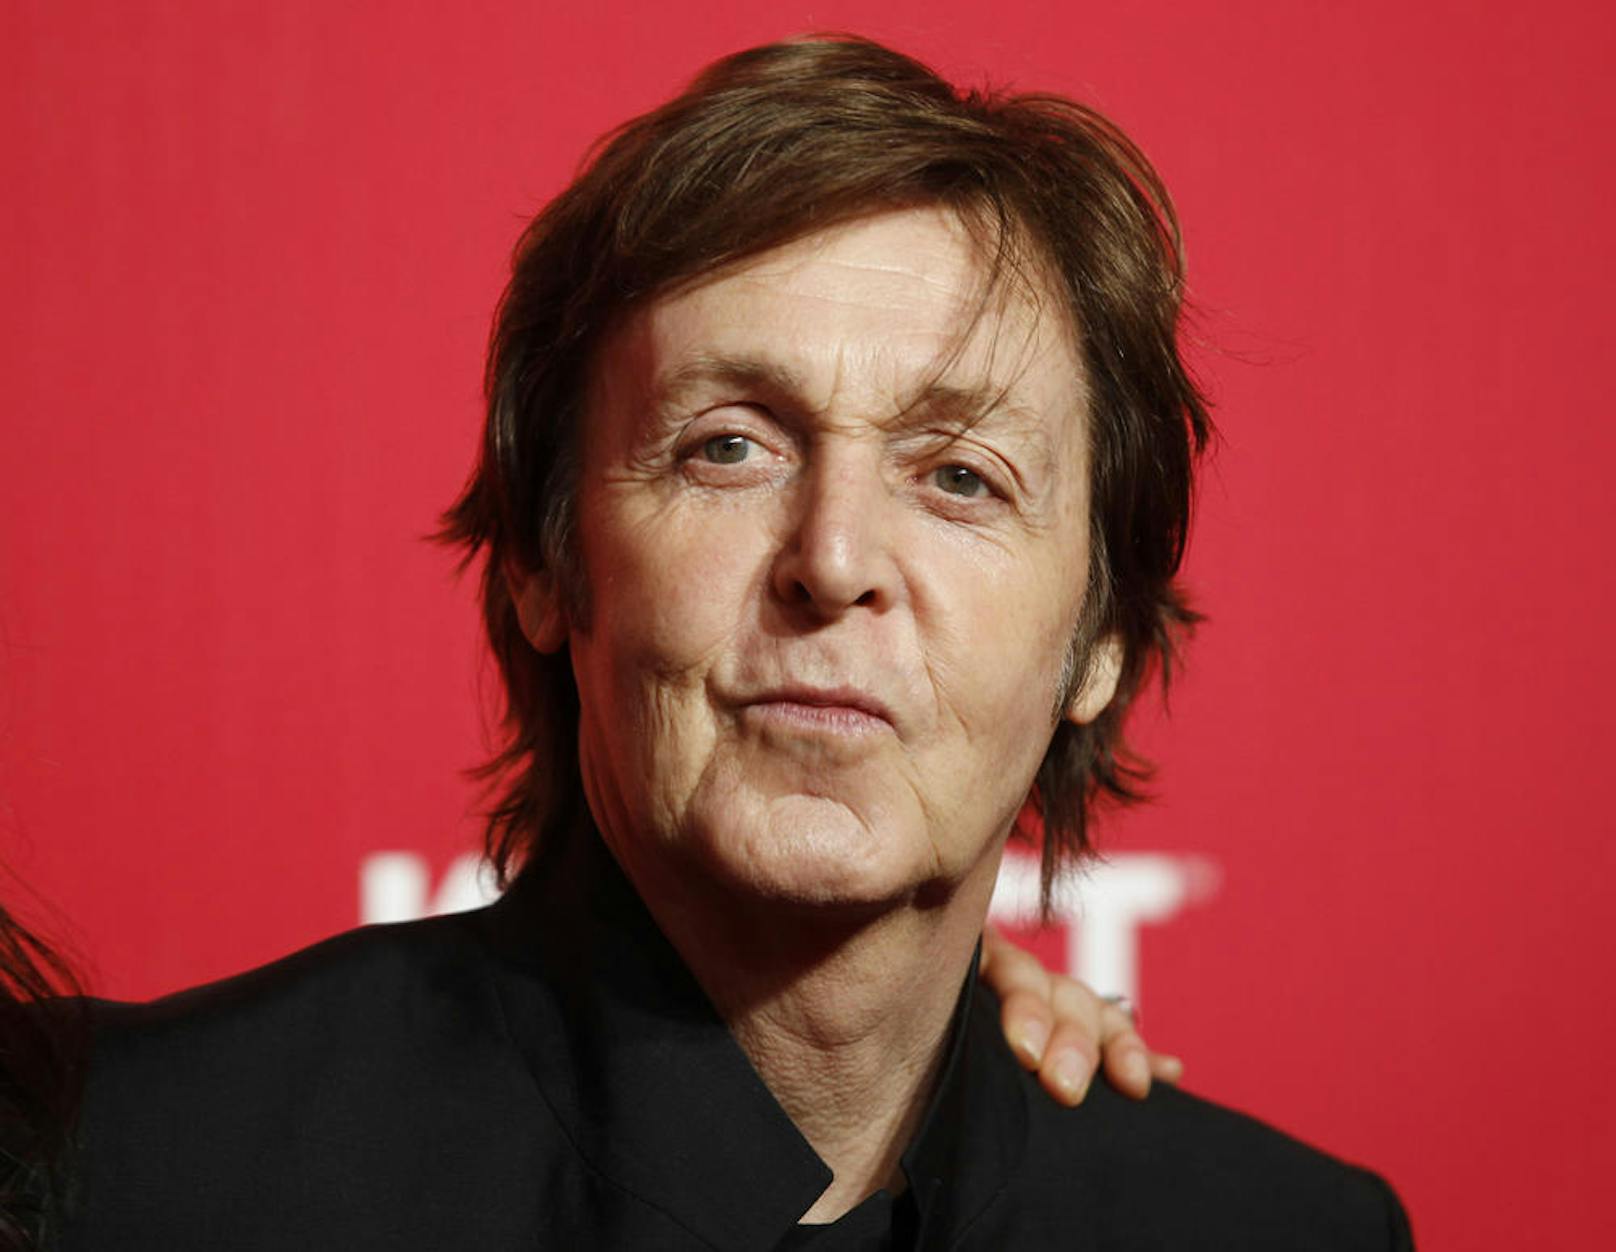 Paul McCartney 2012 bei MusiCares Person of the Year in Los Angeles.